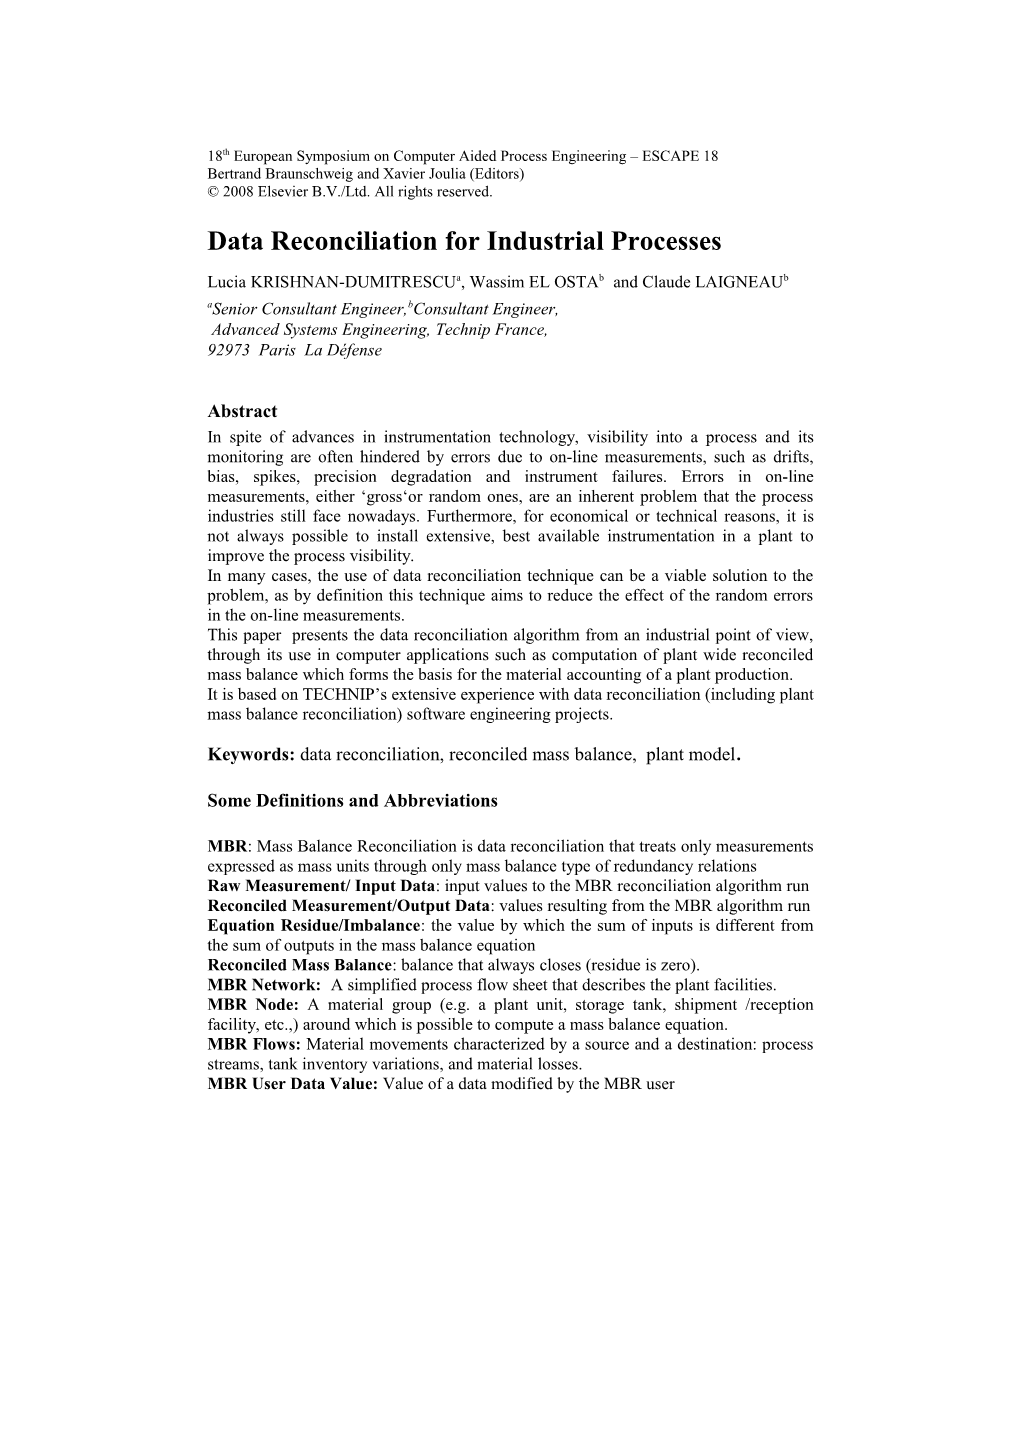 Data Reconciliation for Industrial Processes